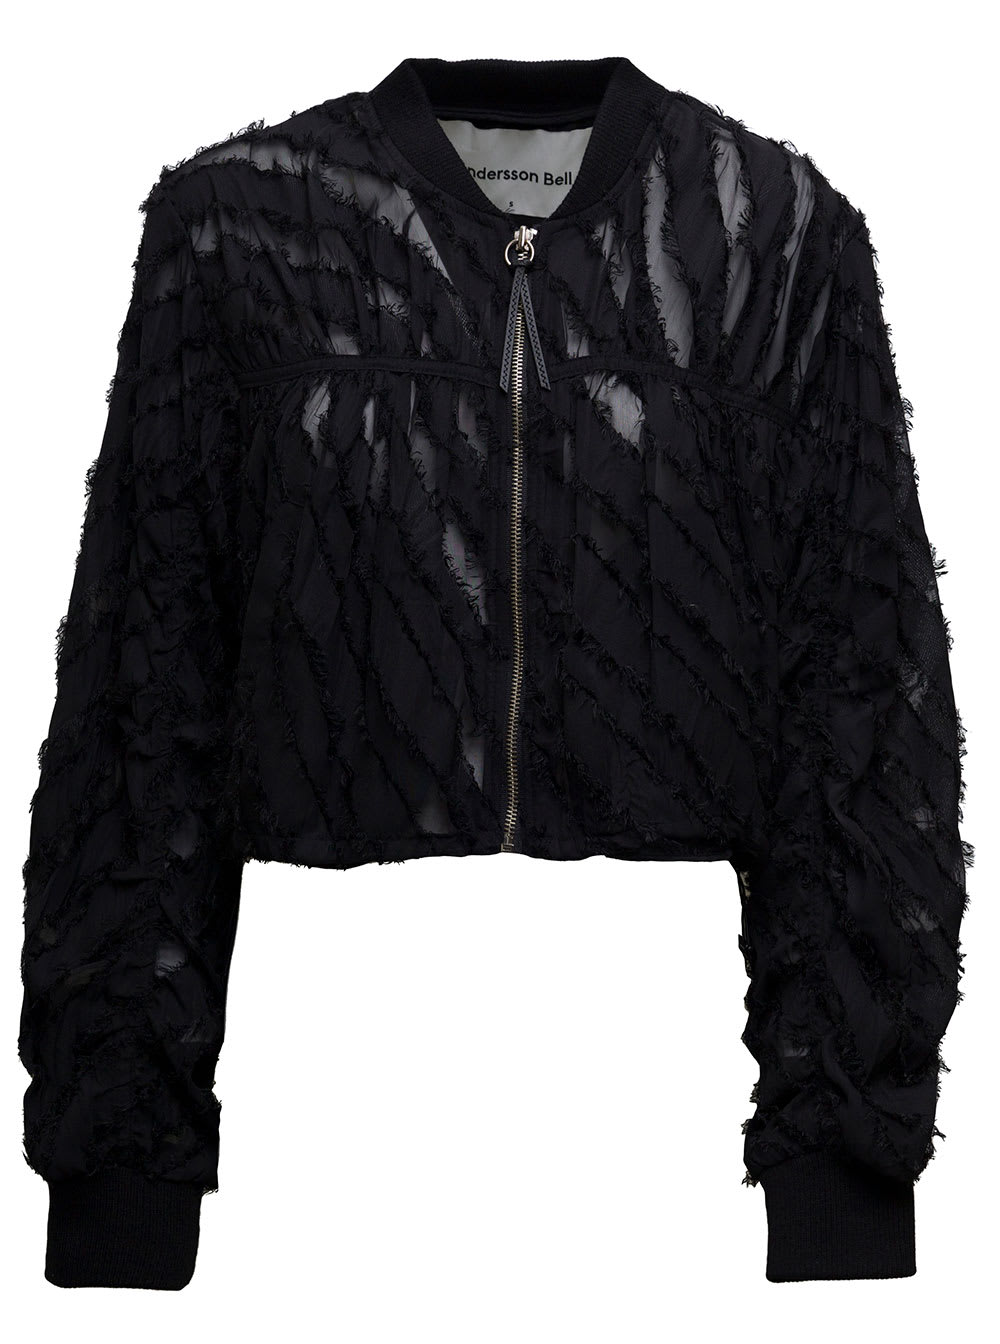 Andersson Bell Womens Adia Black Fringed Fabric Bomber Jacket